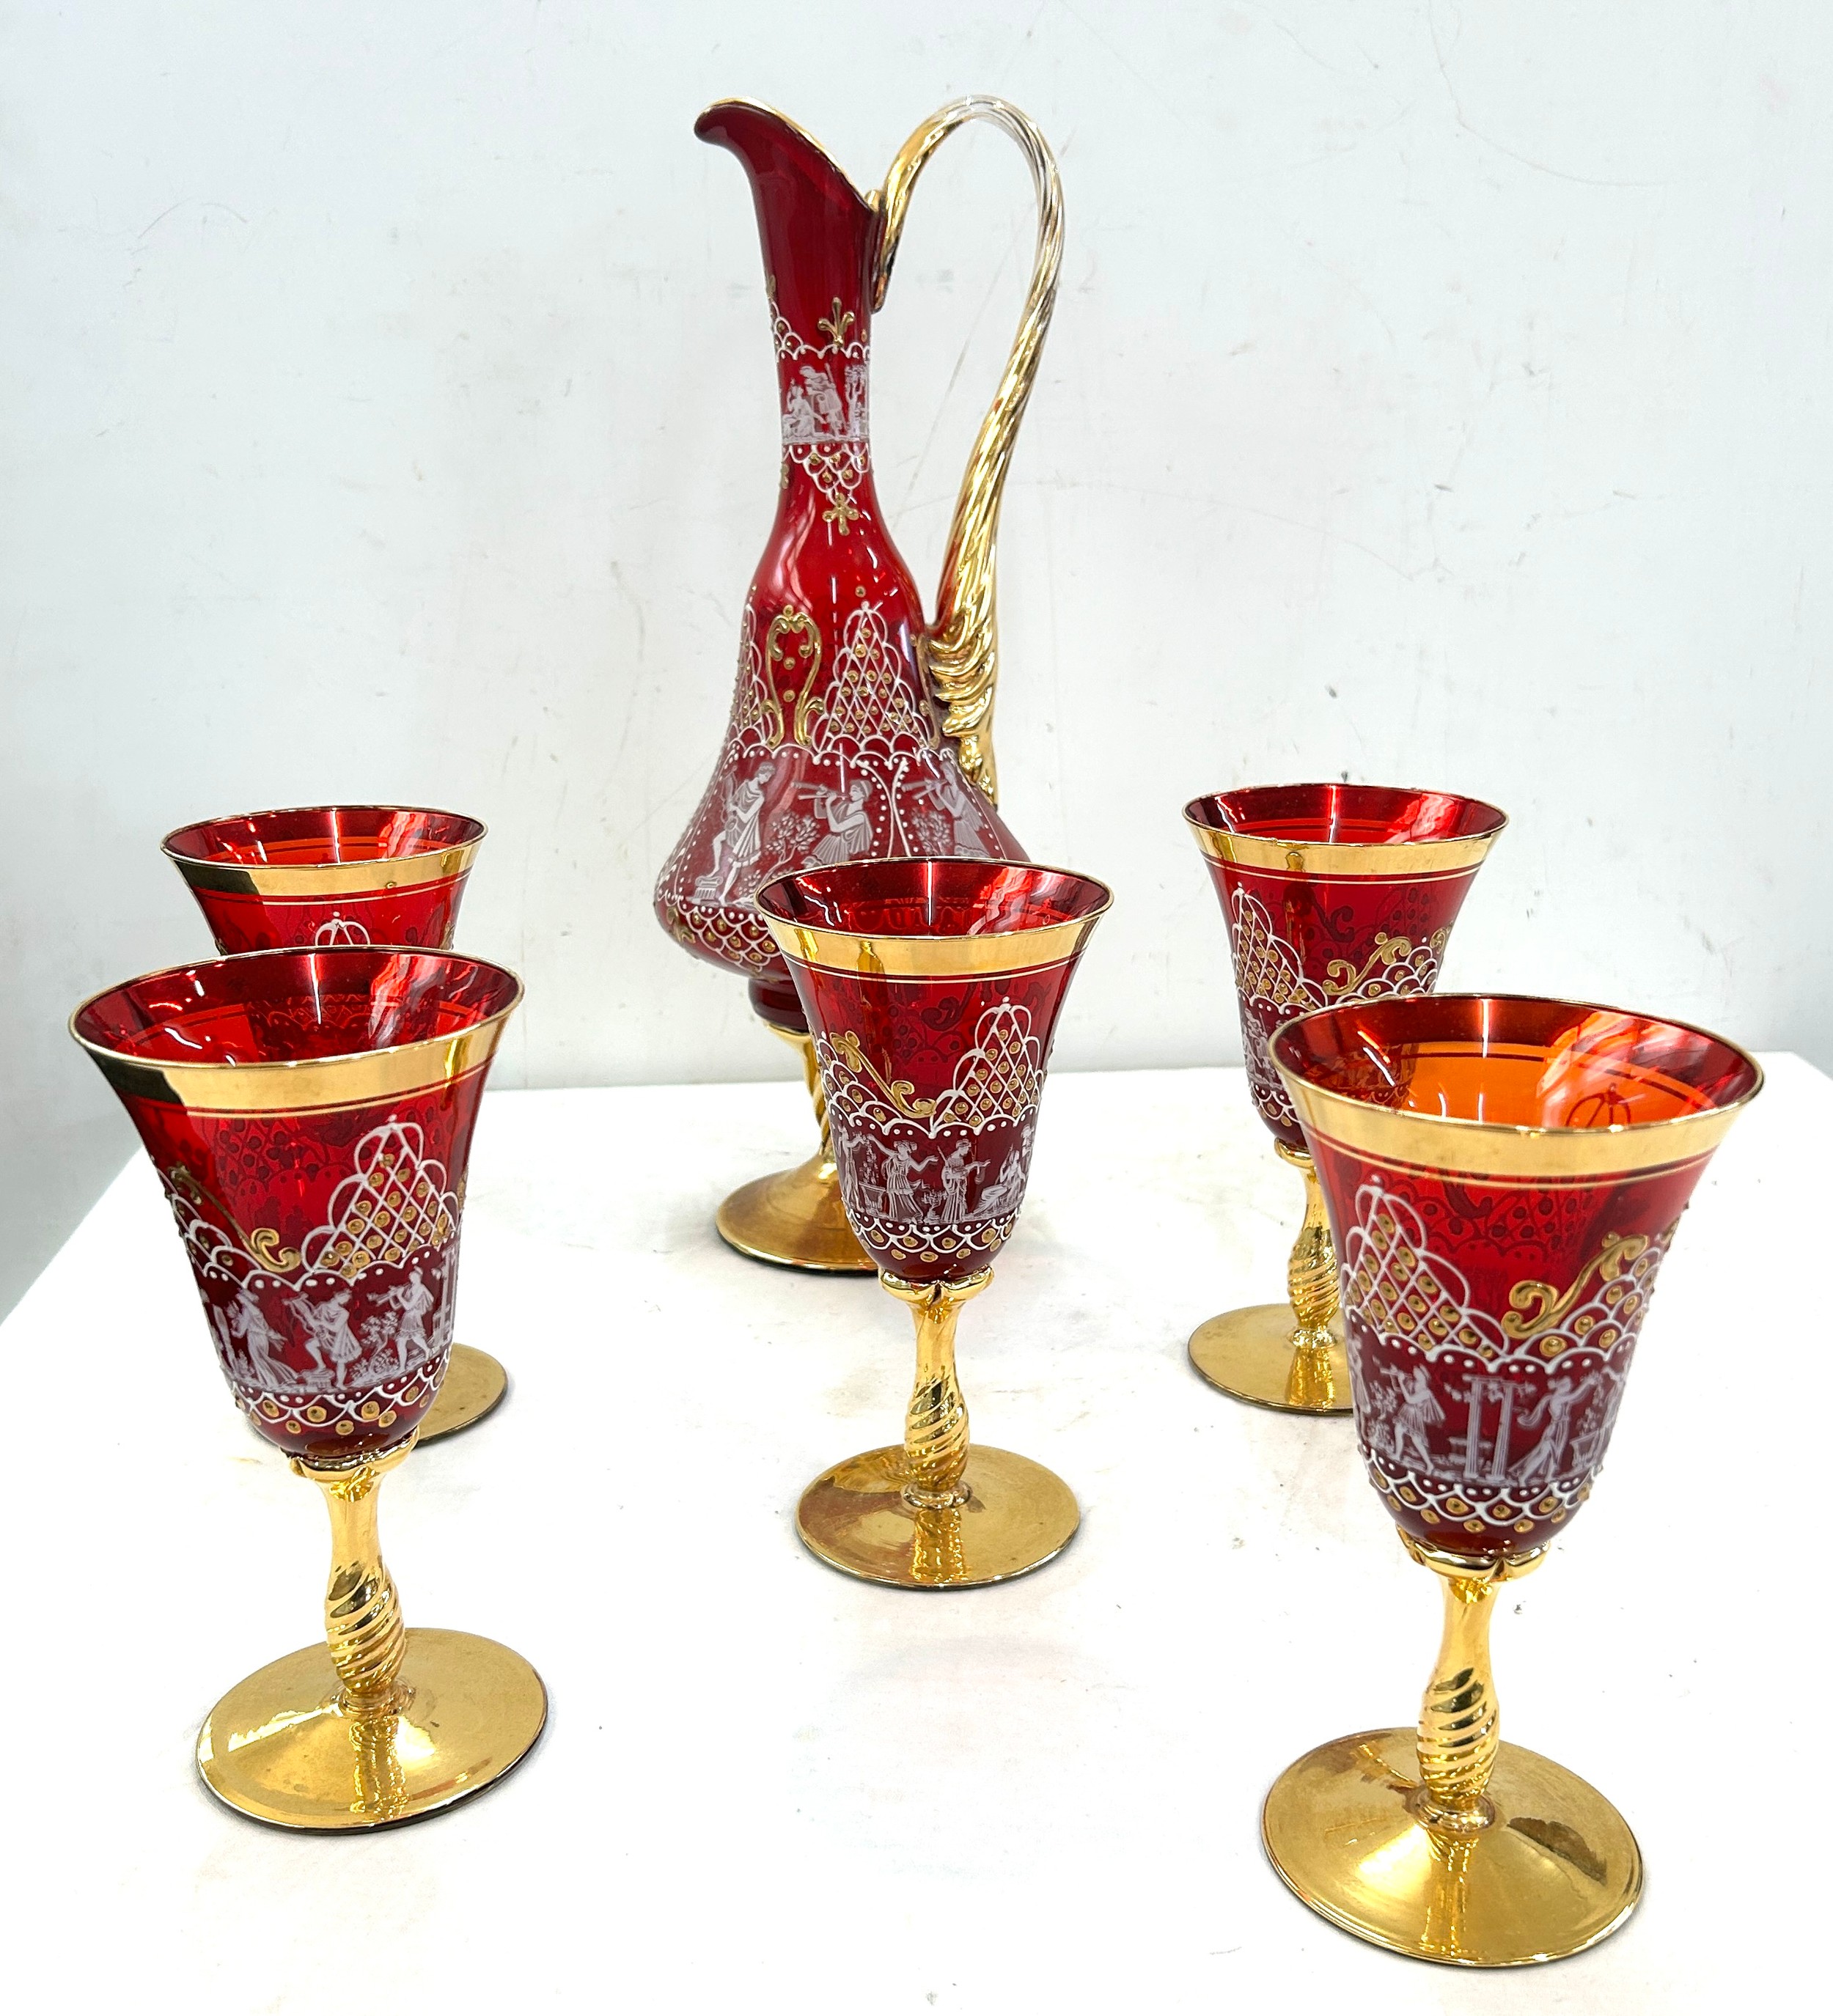 Venetian enamelled glass decanter and five glasses